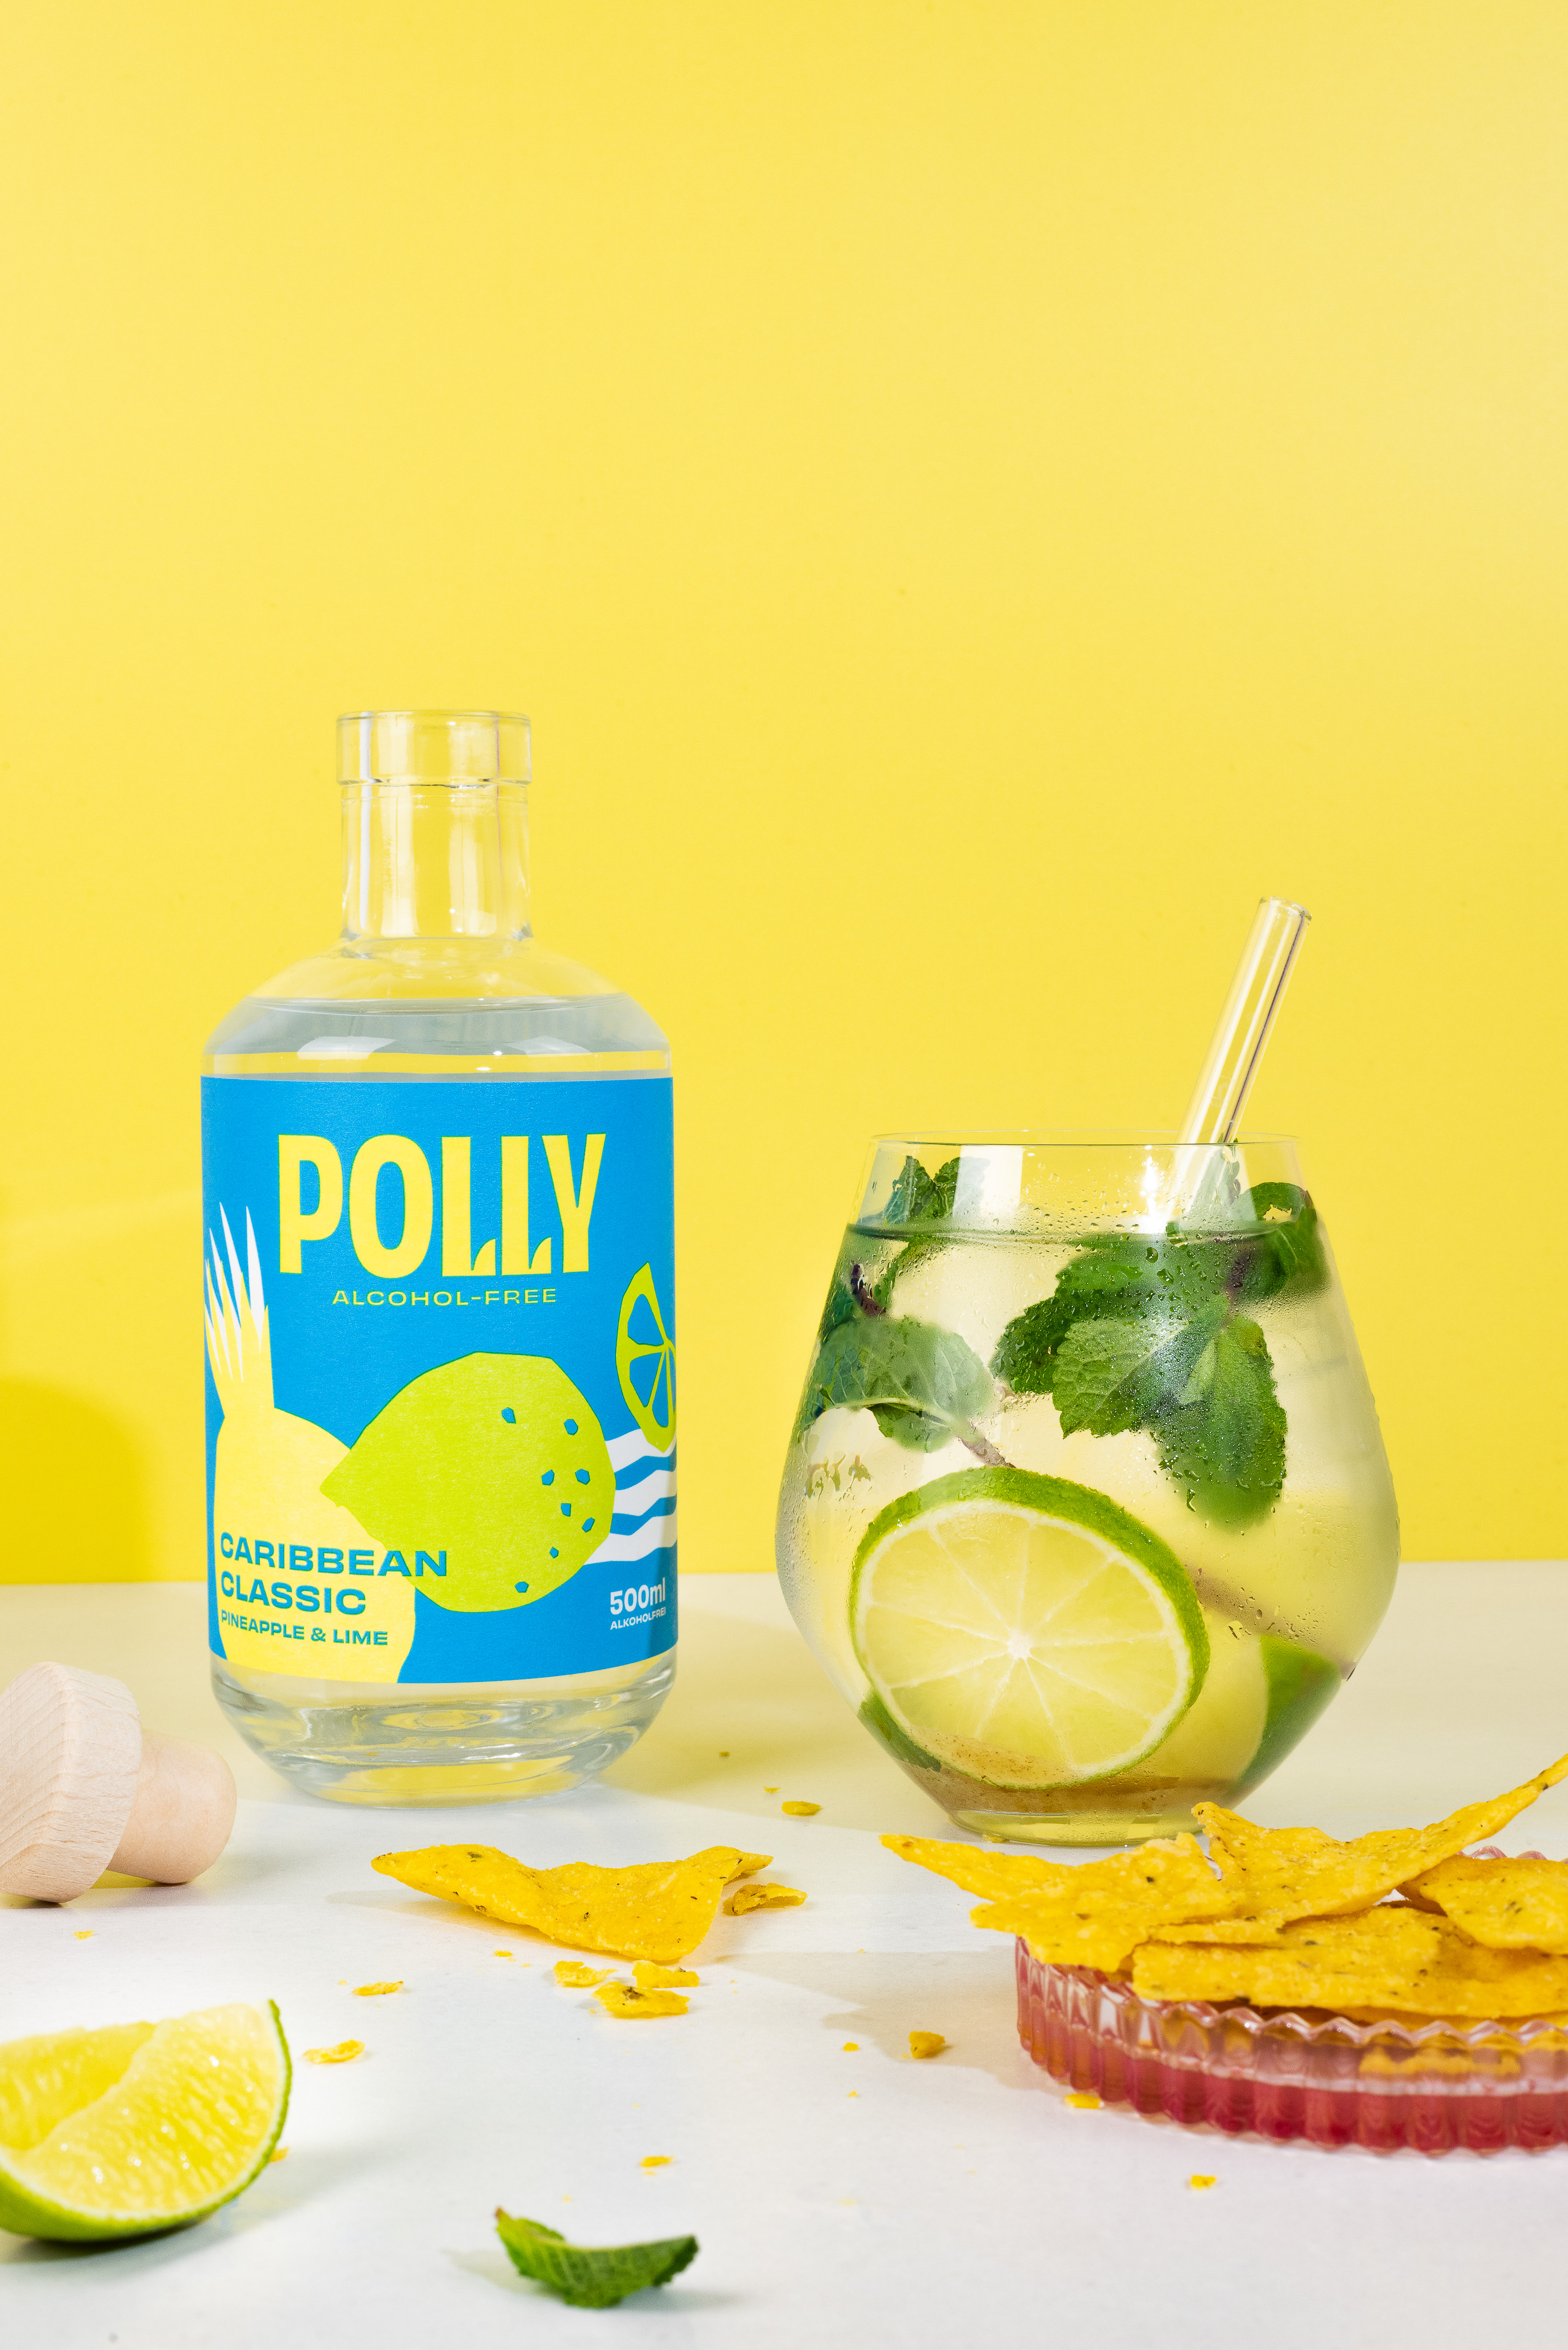 Polly - Caribbean Classic Pineapple - alkoholfrei 0,5l